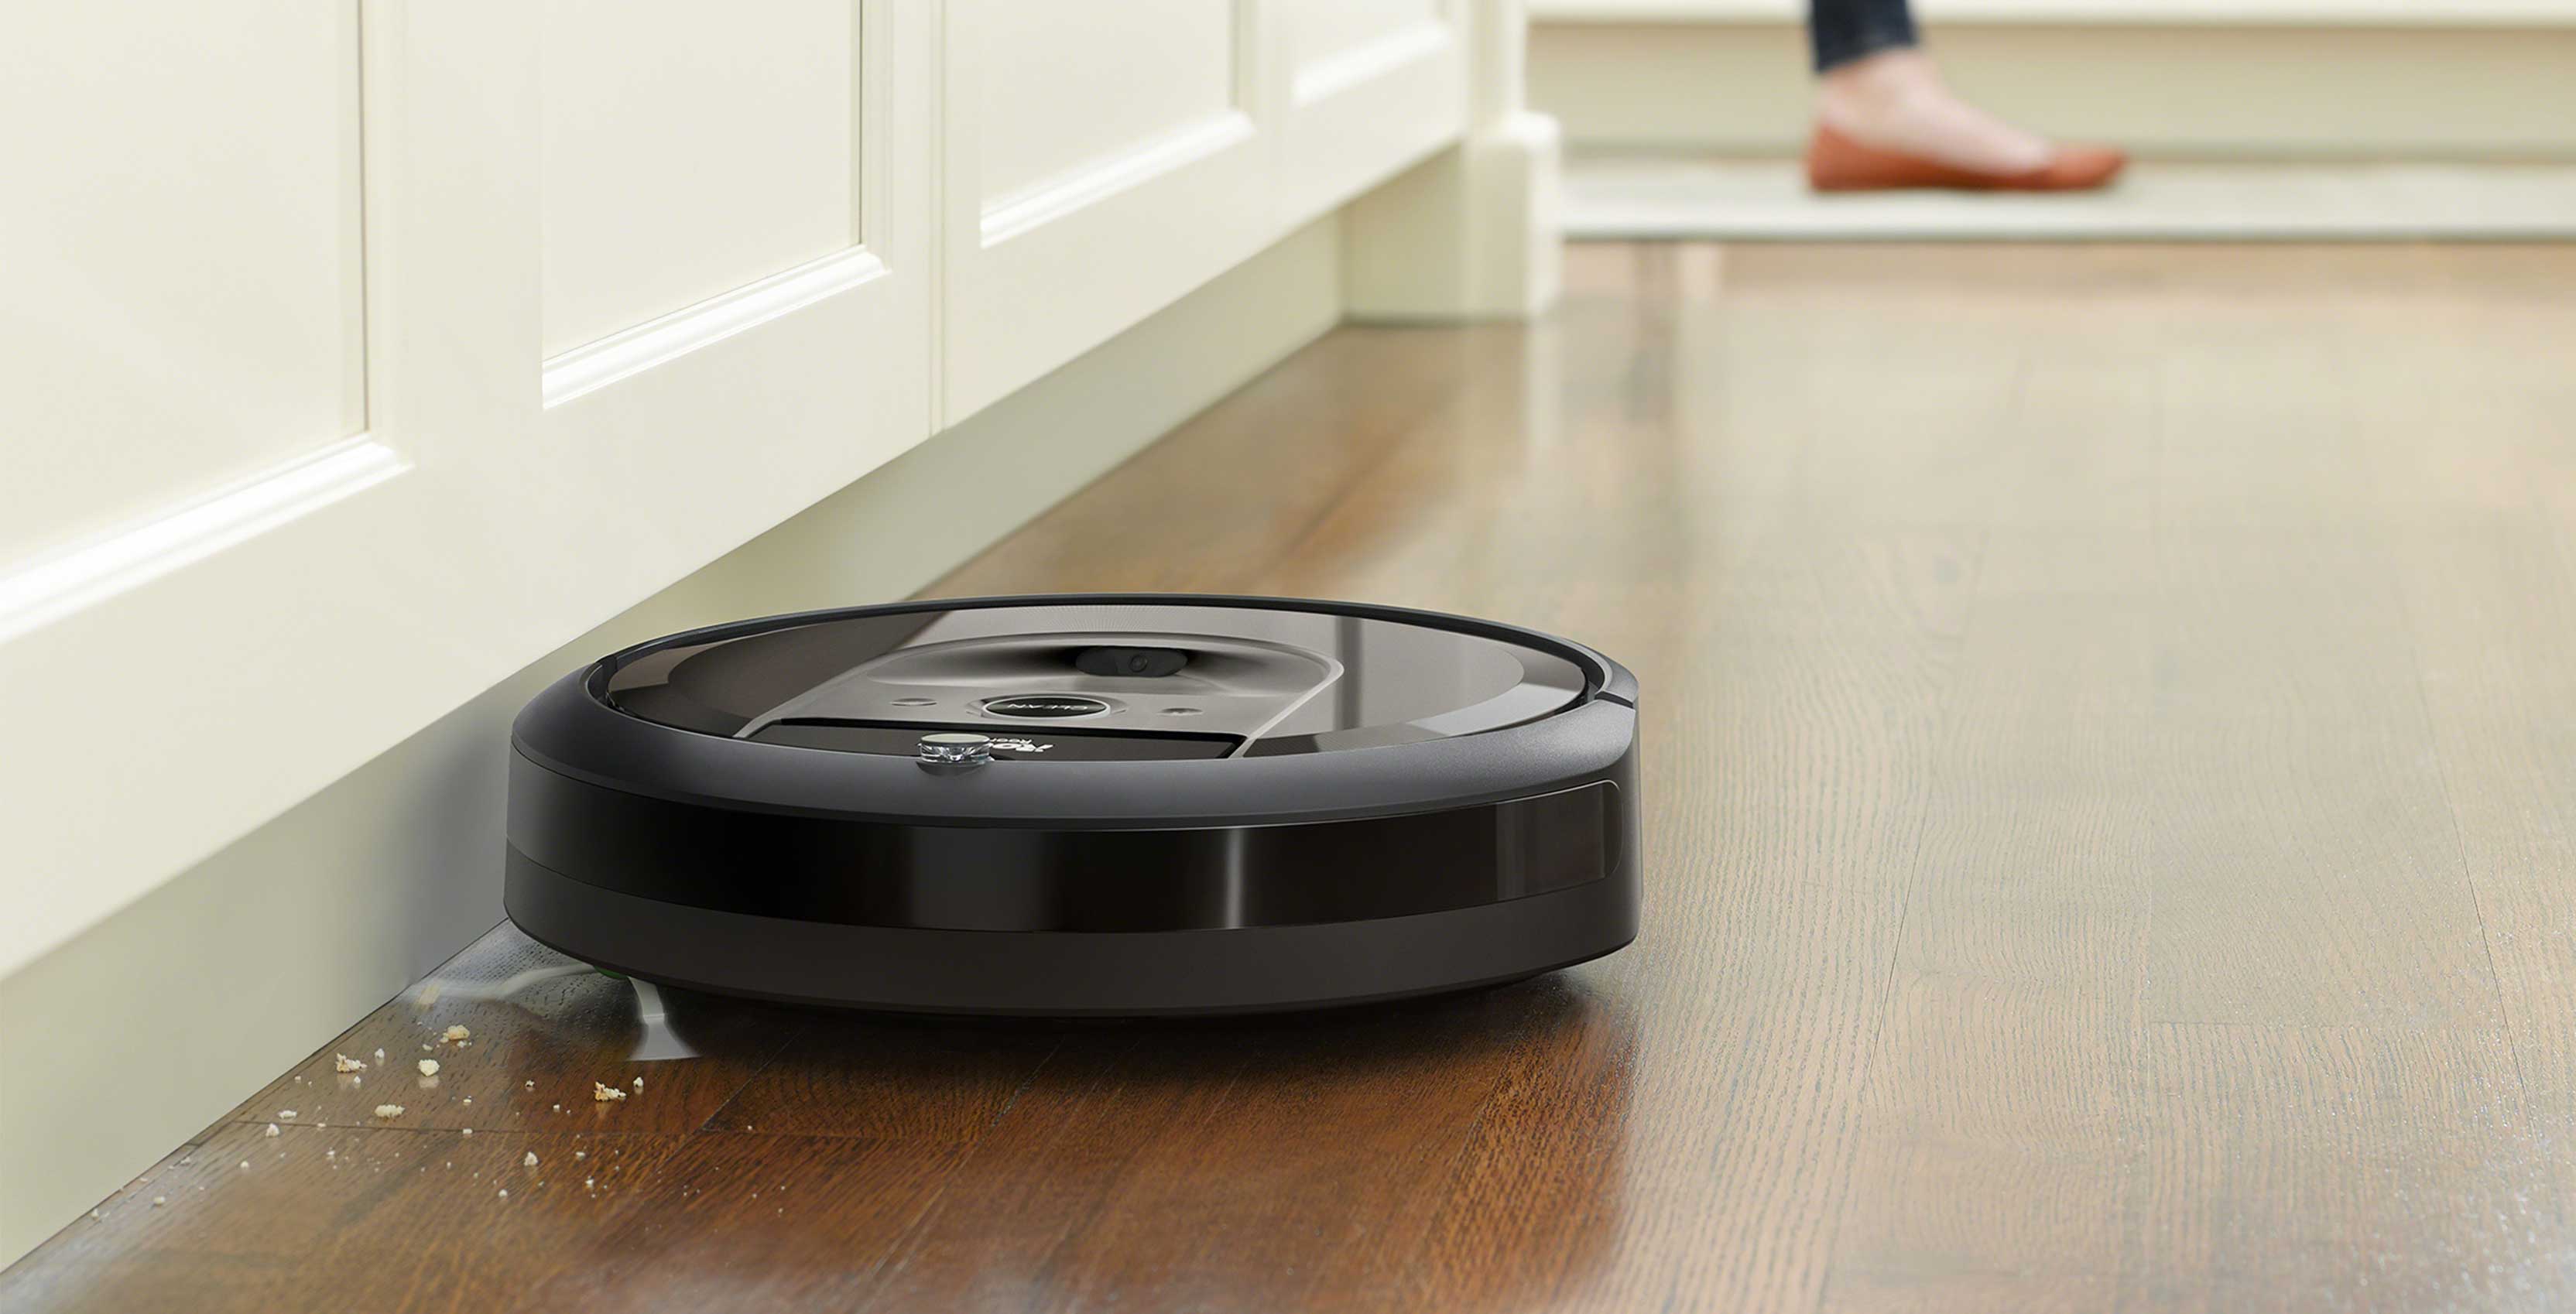 Youtuber Hacks Roomba To Scream And Swear When It Bumps Into Objects